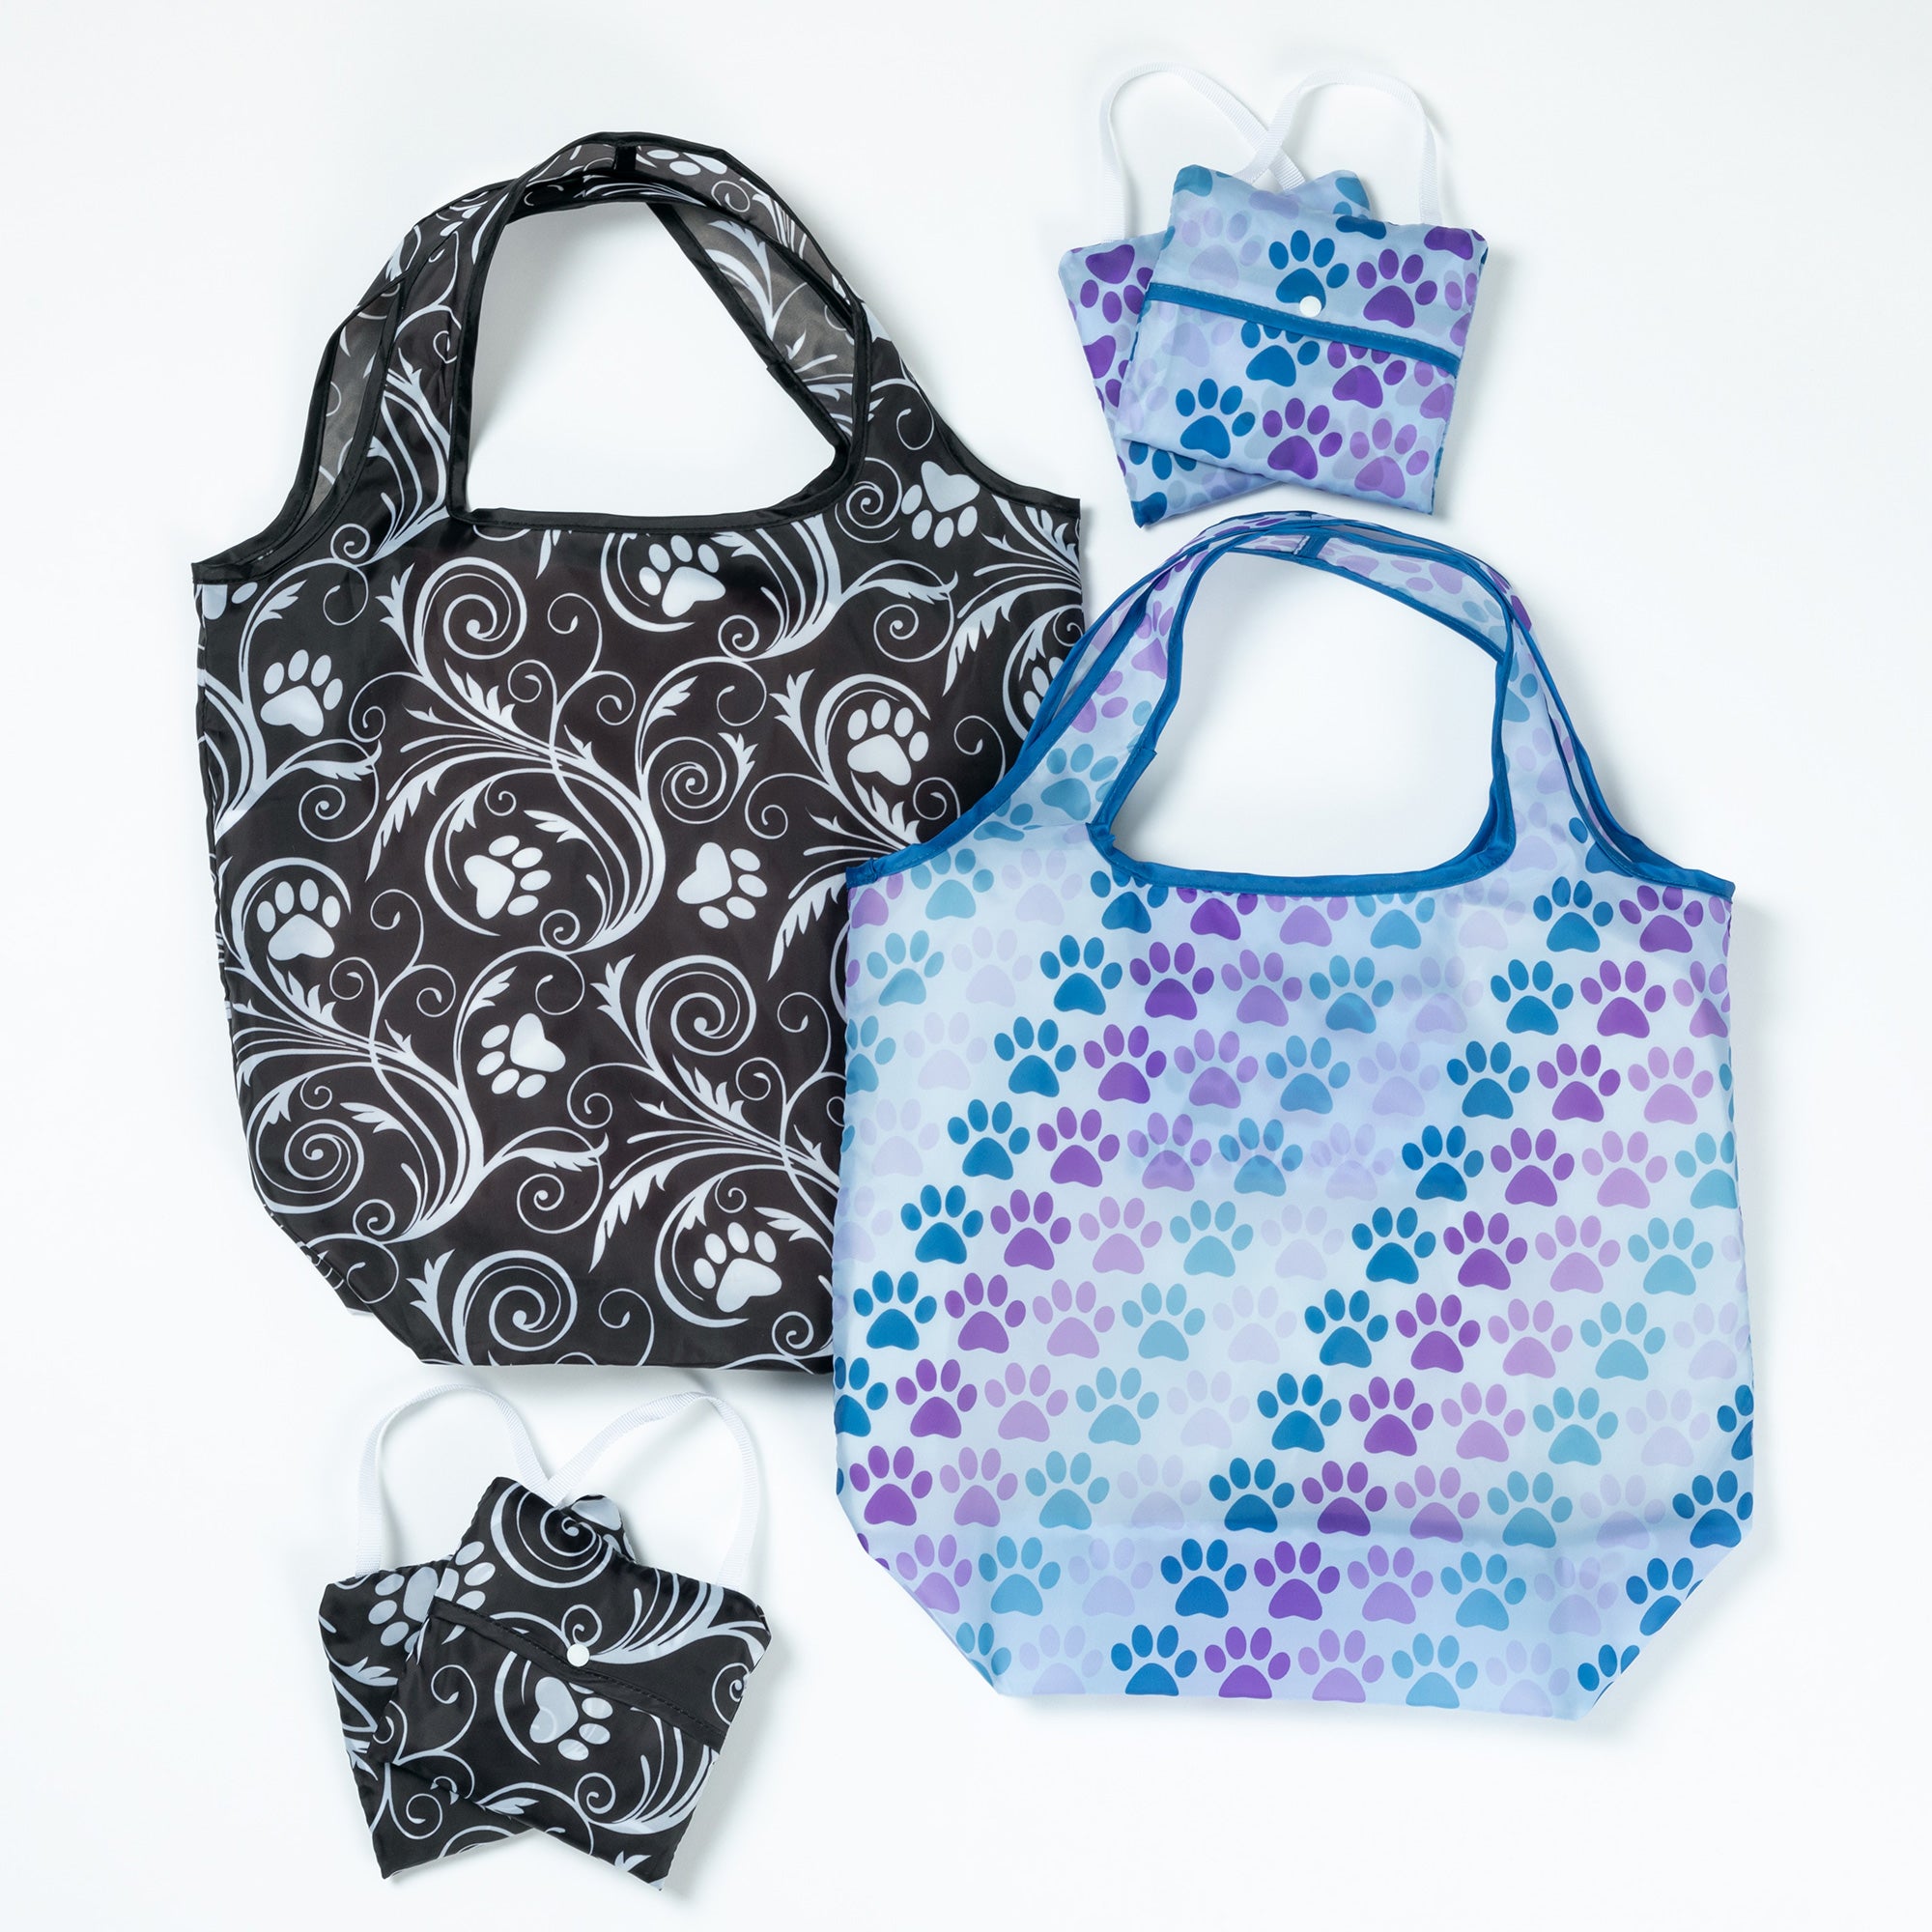 Perfectly Patterned Shopping Totes - Set Of 3 - Flourish Paws